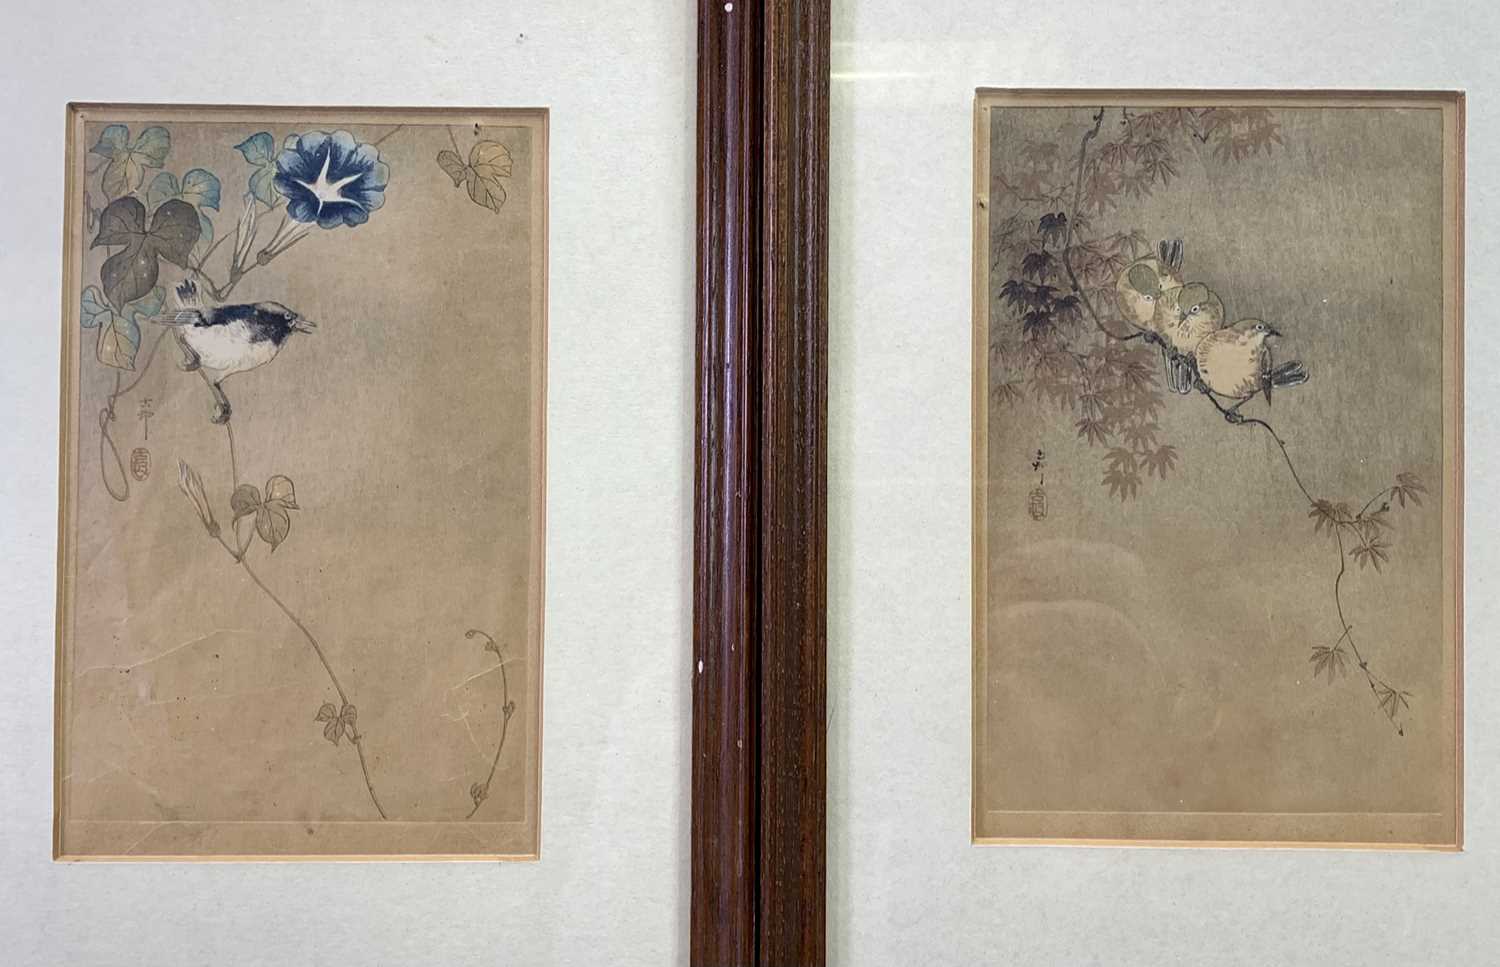 JAPANESE FLORAL PAINTING ON FABRIC - 51.5cms sq, 19th century hand coloured engraving by W H - Image 2 of 2